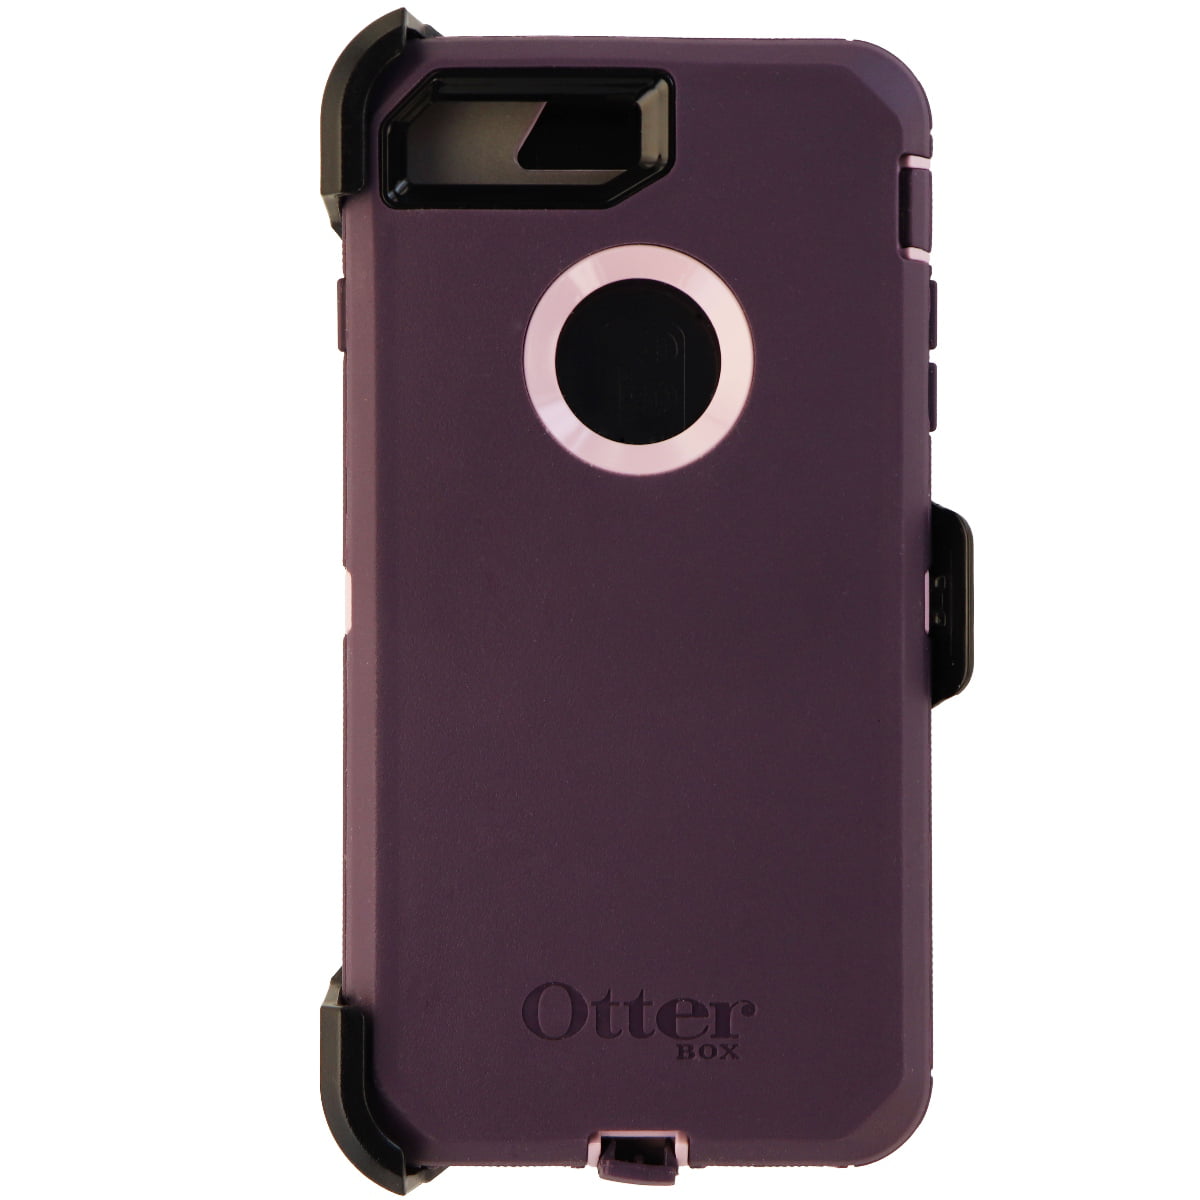 OtterBox Defender Series Protective Case Cover for iPhone 8 Plus 7 Plus